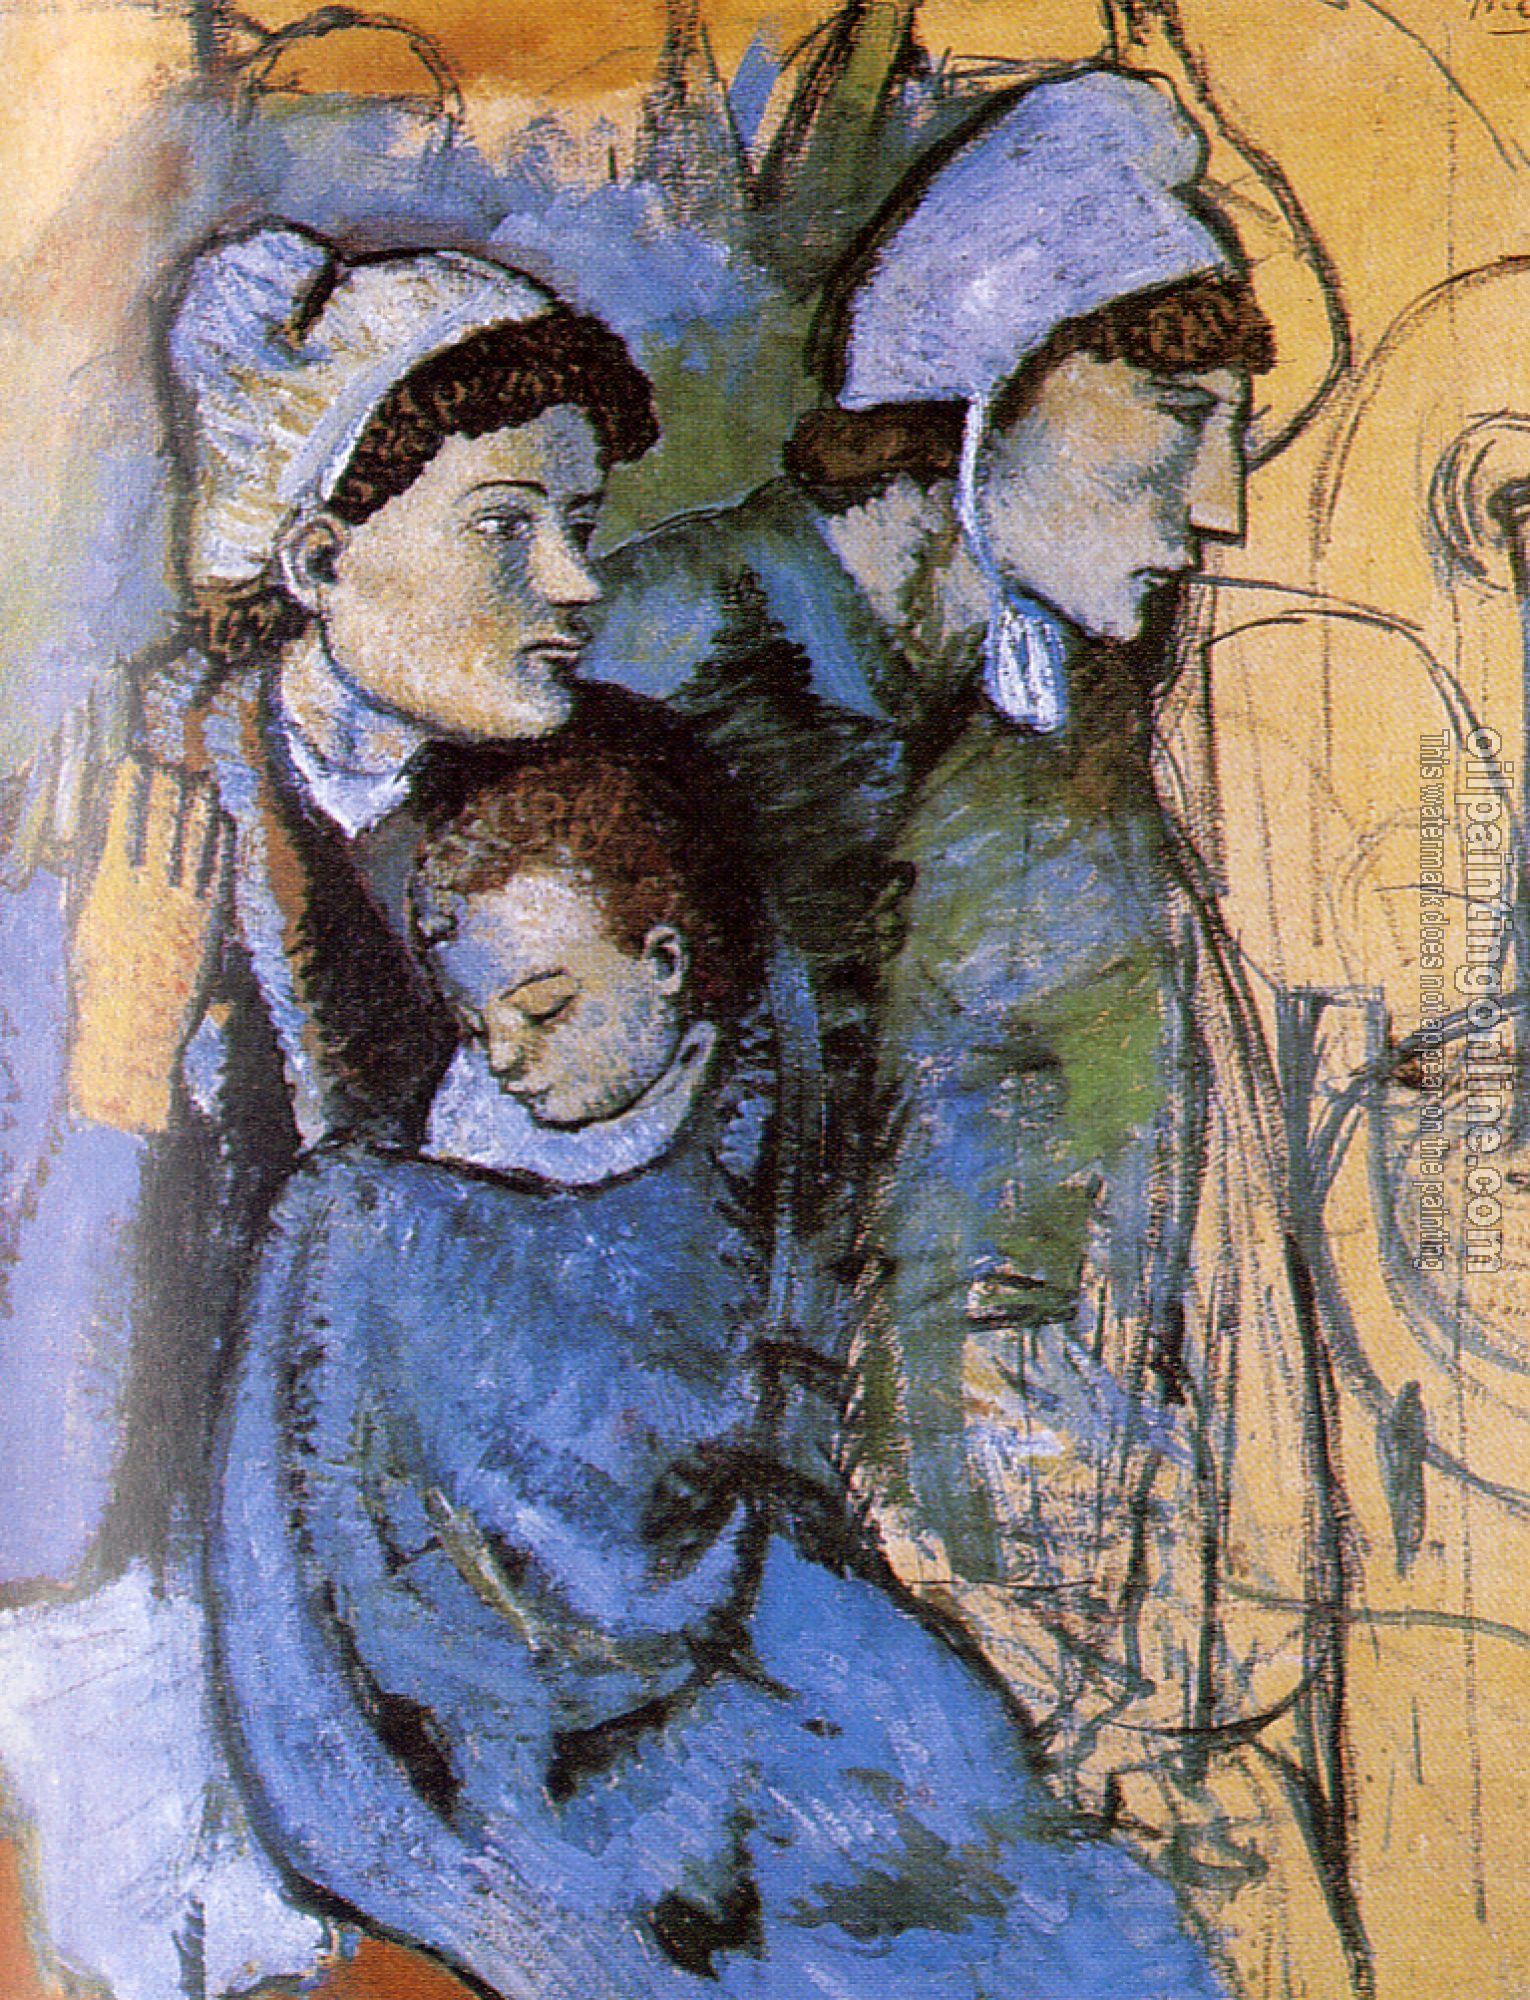 Picasso, Pablo - women at the well